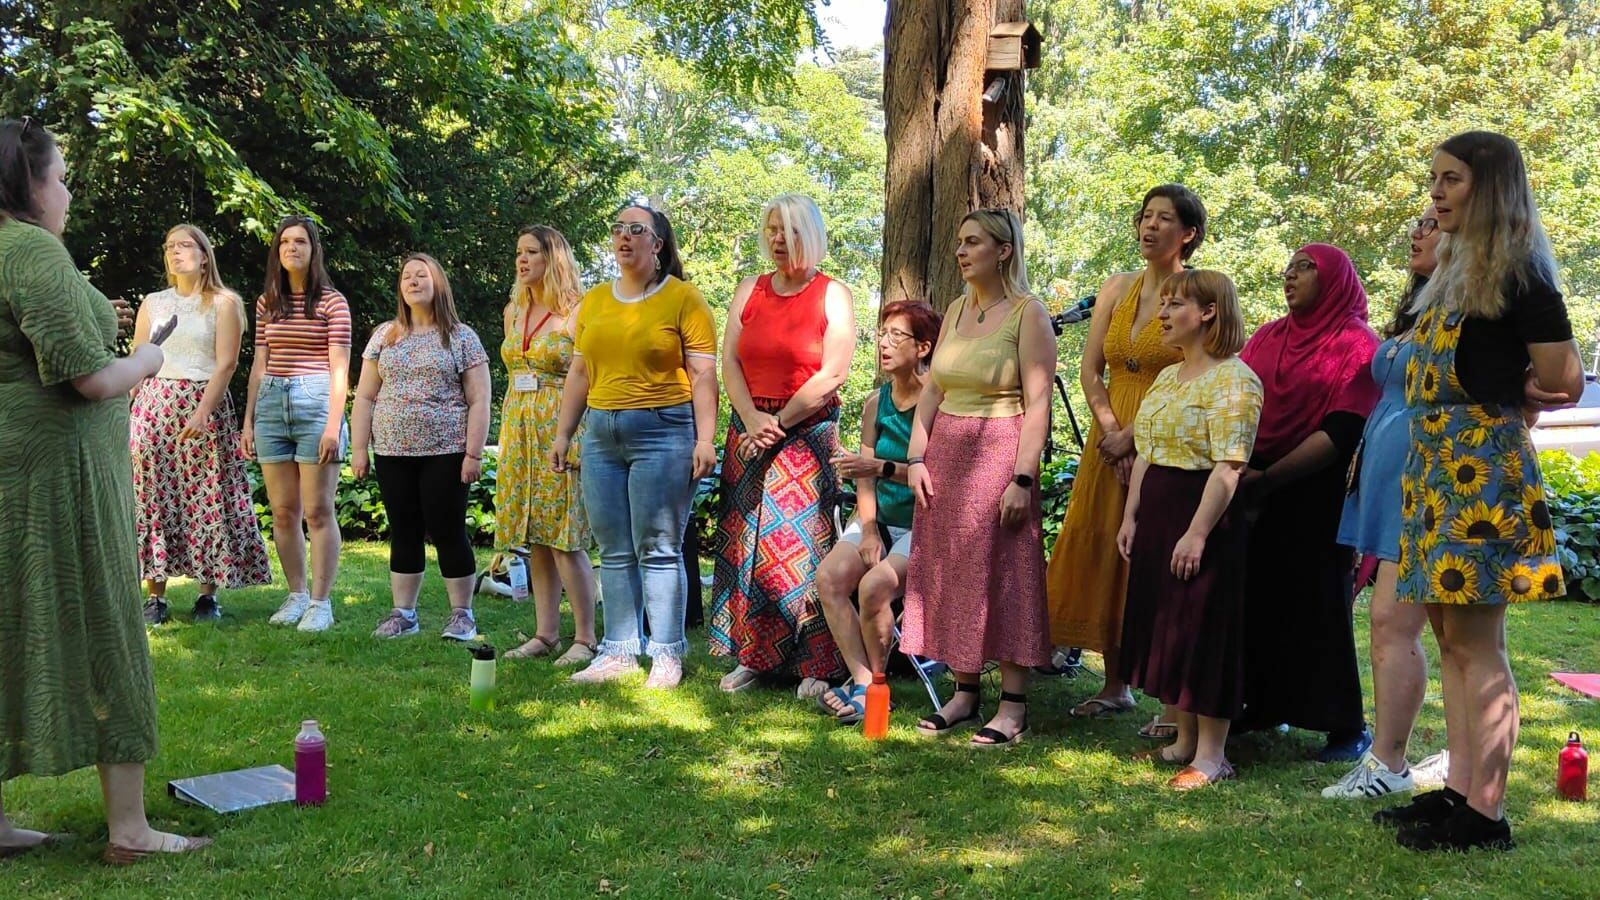 Female choir members dressed in colorful clothing sing in a park, led by an instructor.